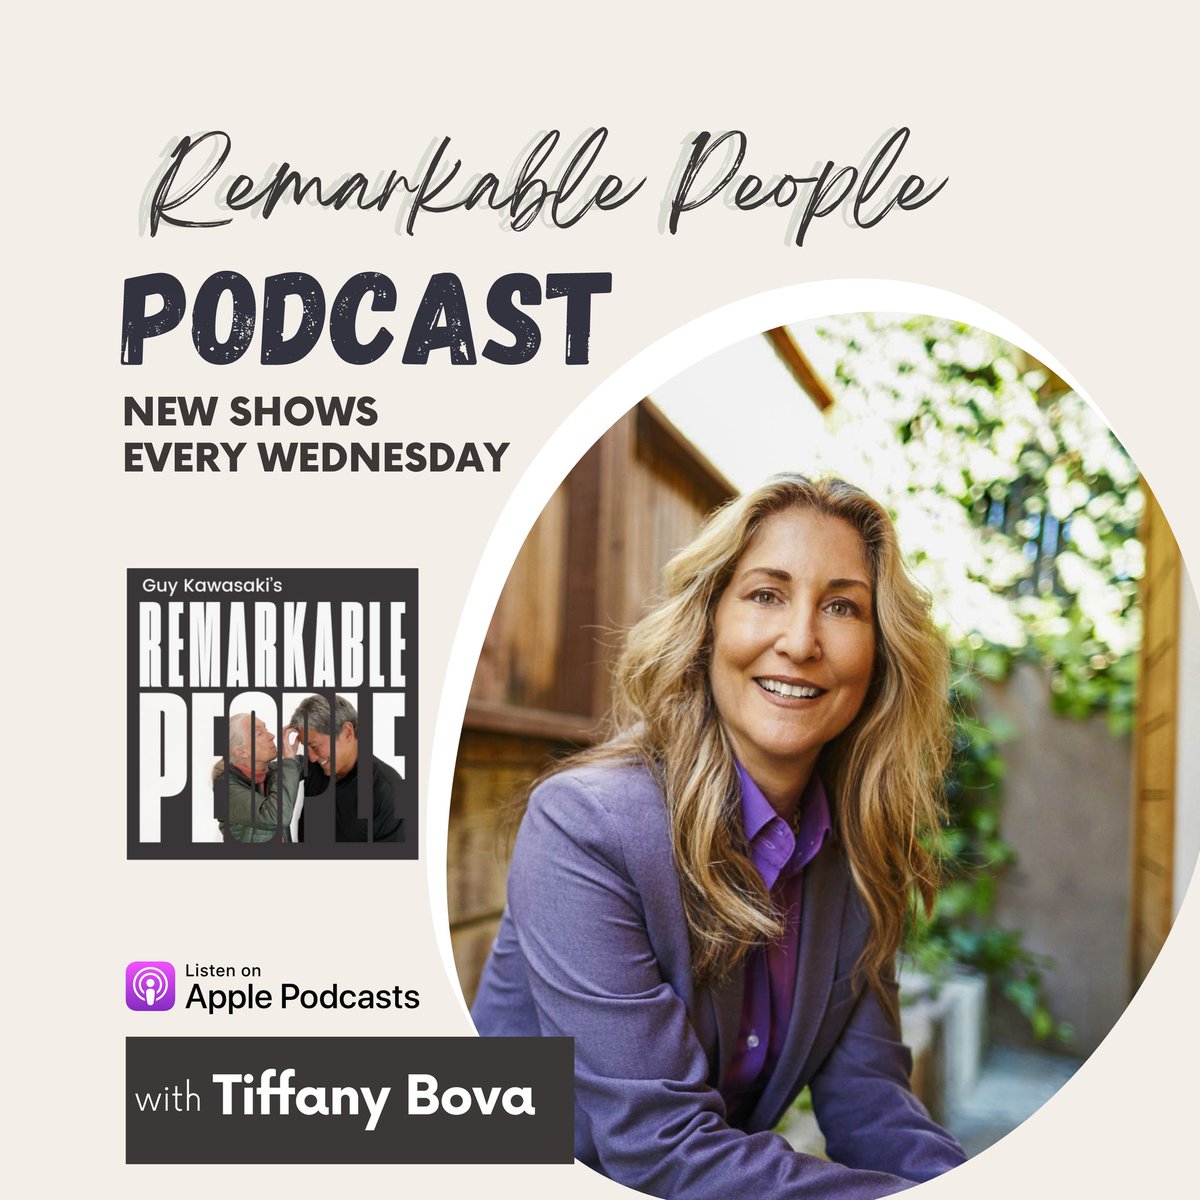 Unlock the Power of a Remarkable Employee Experience with Tiffani Bova: bit.ly/3OYvlU4
#remarkablepeople #podcast